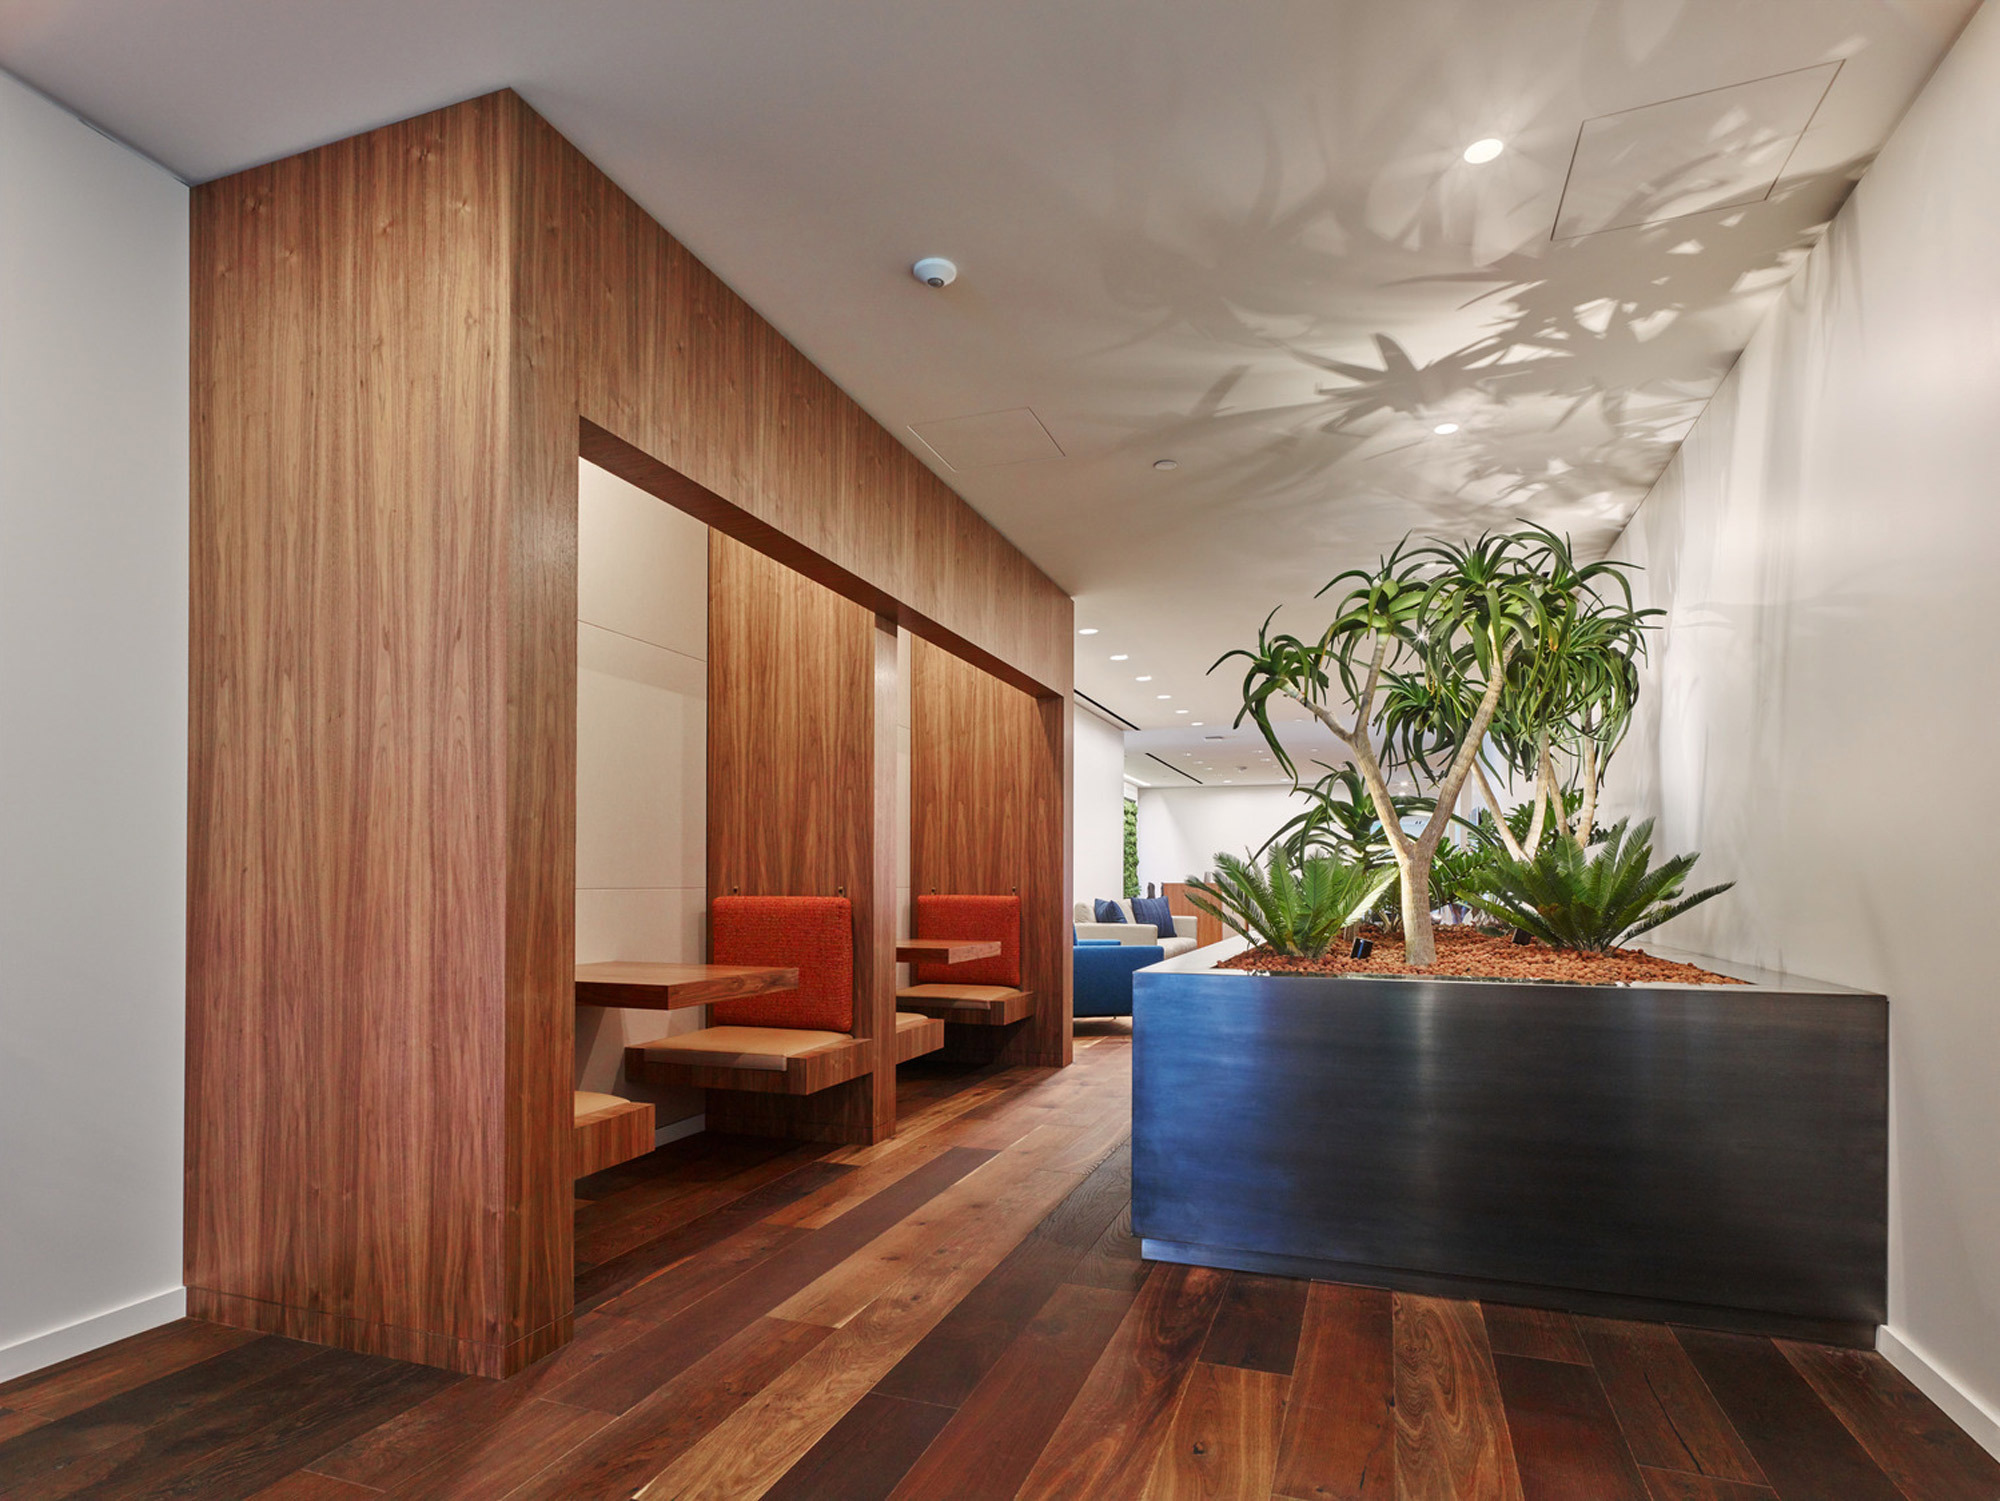 Modern interior featuring warm-toned wooden panels, sleek built-in bench seating, and a raised, dark-hued planter with lush greenery. Textured white ceiling panels complement the rich wooden flooring, enhancing the space with a blend of organic and contemporary design elements.